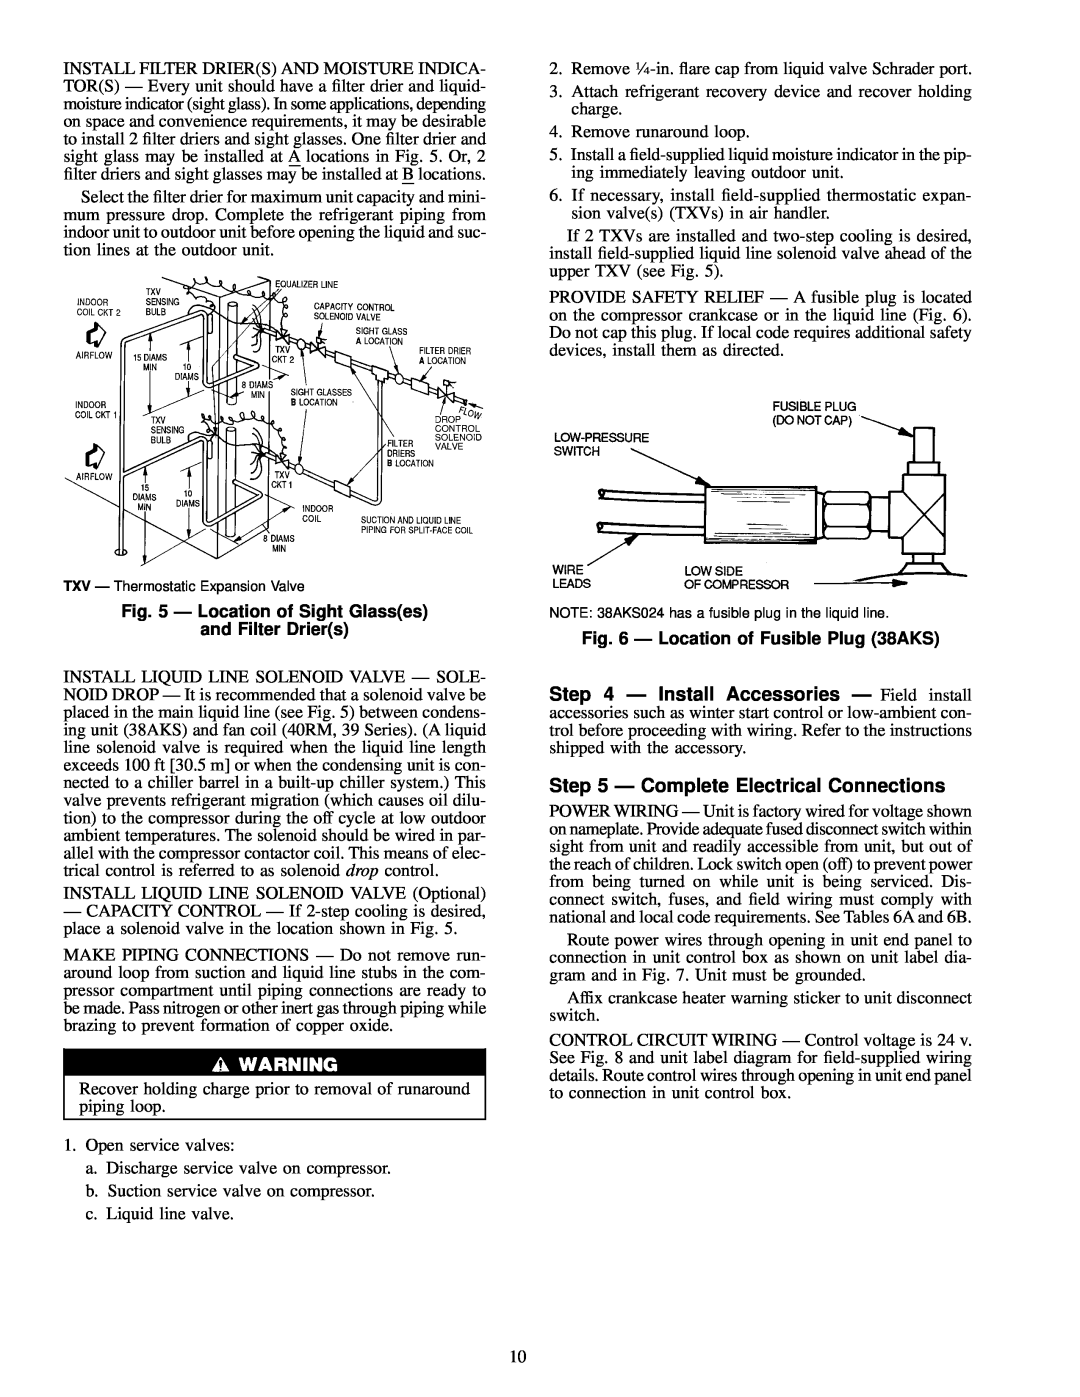 Carrier 38AKS013-024 specifications Ð Complete Electrical Connections, Ð Location of Sight Glasses, and Filter Driers 